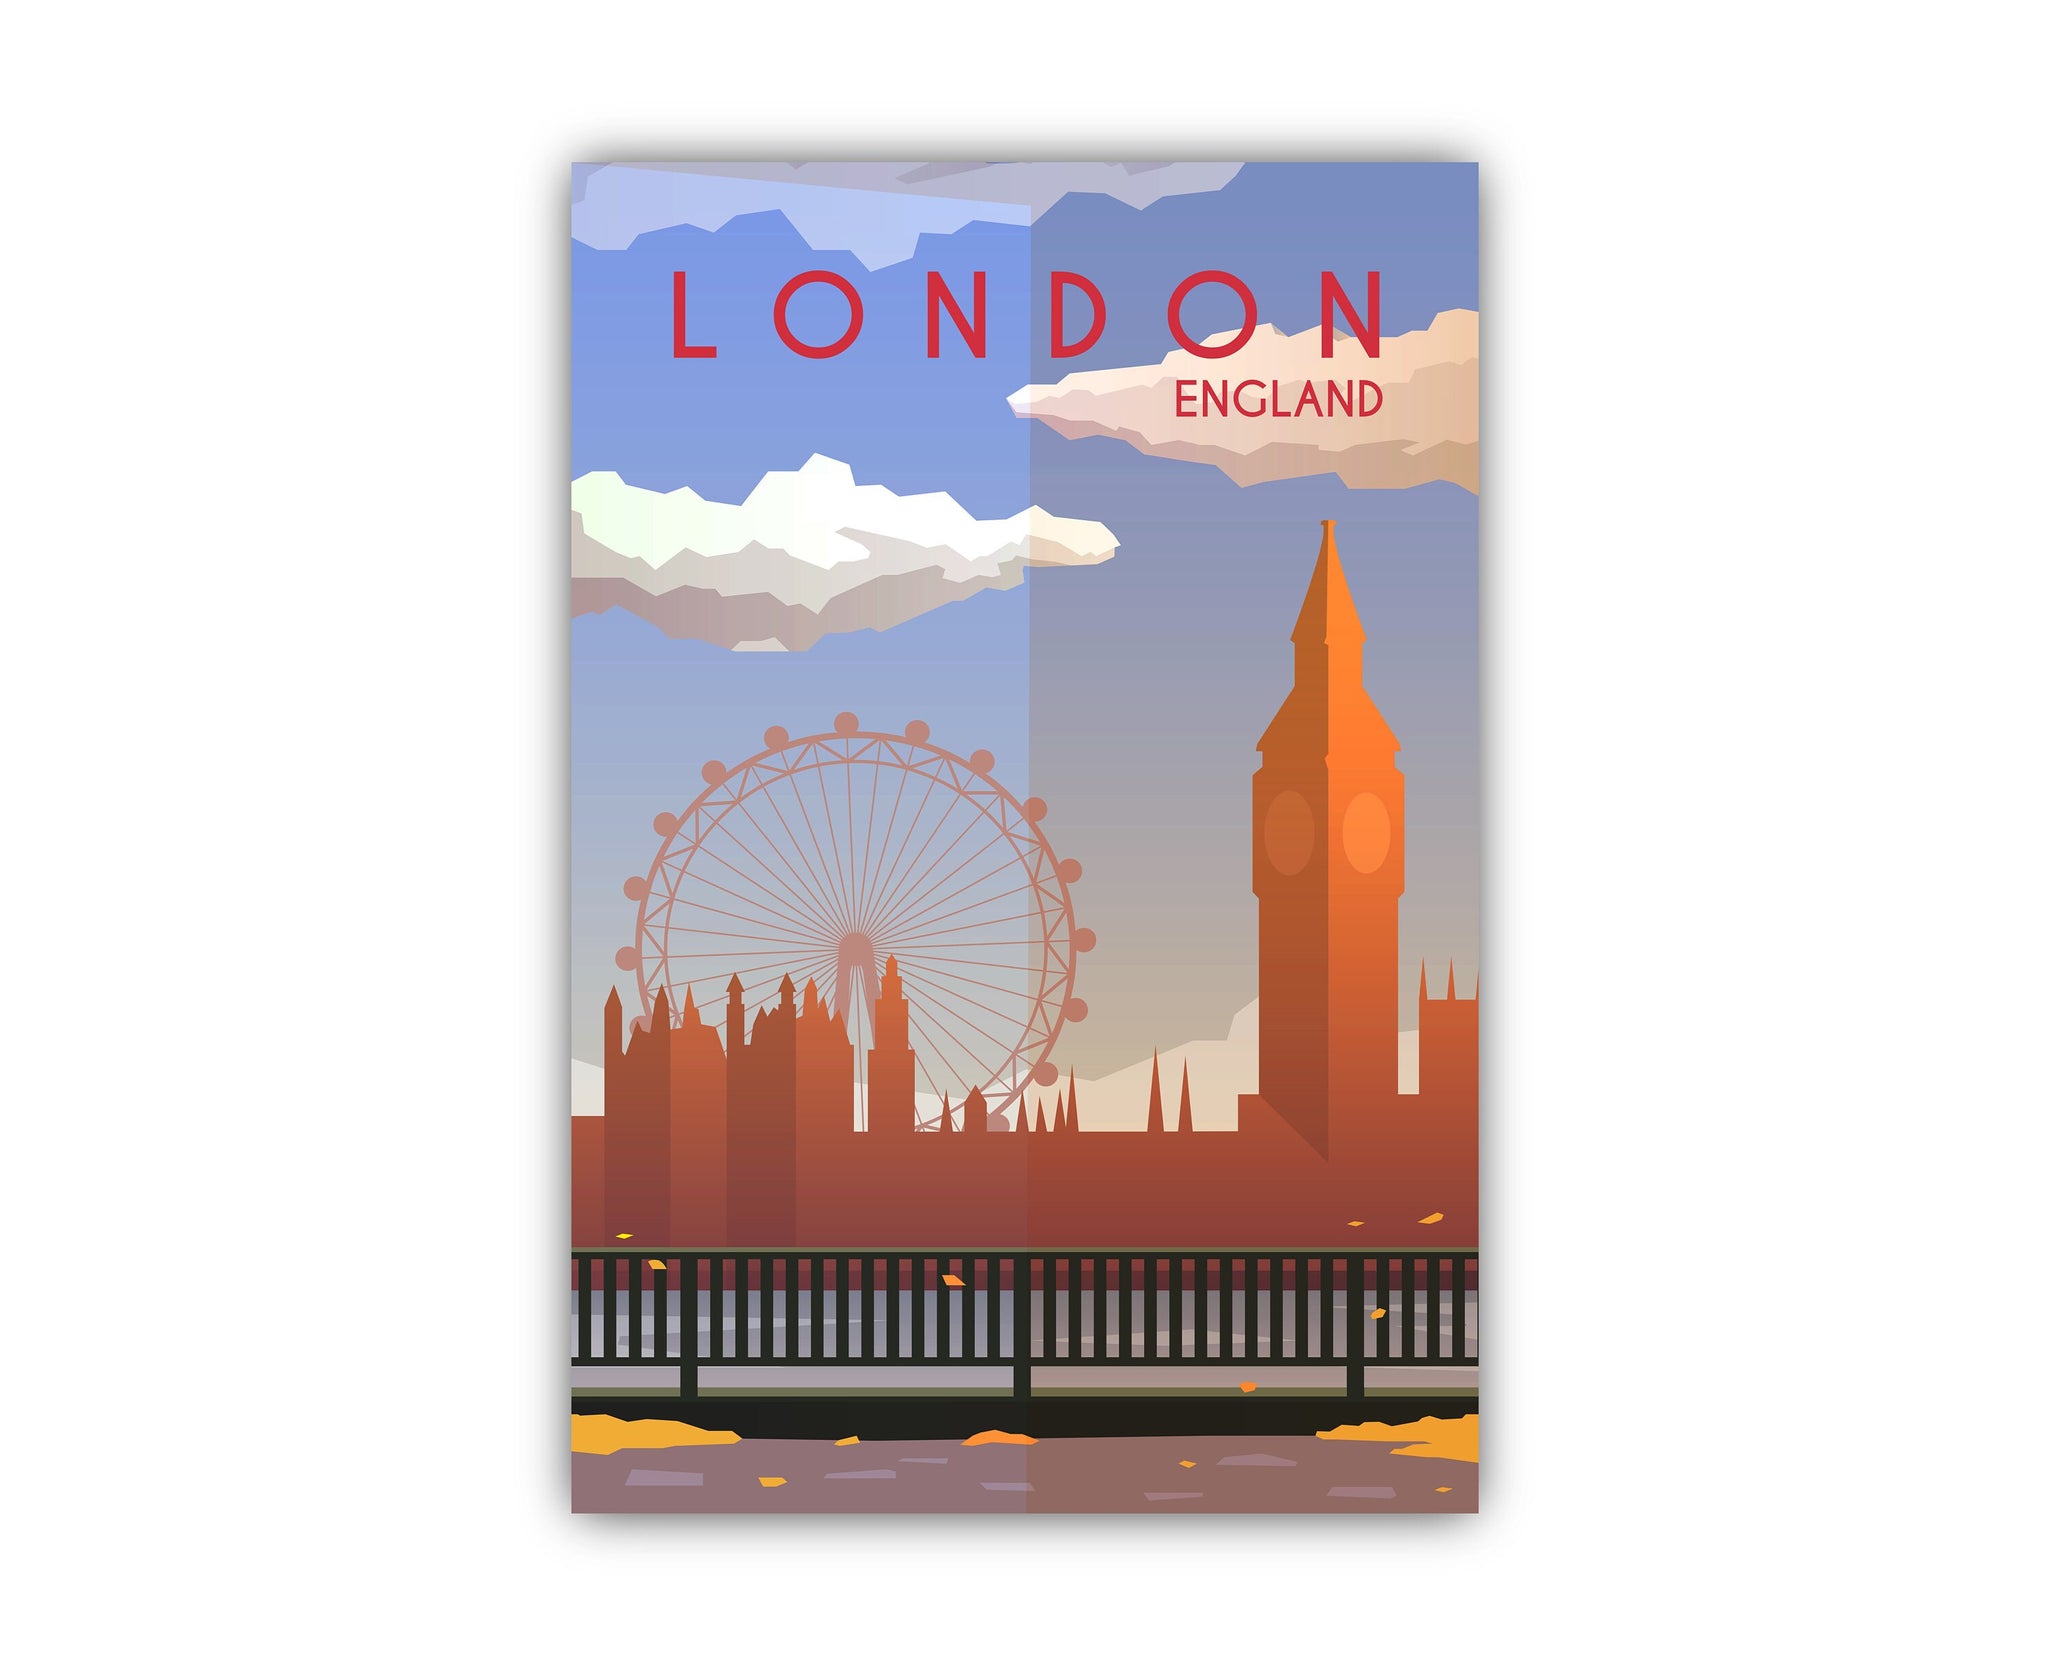 Retro Style Travel Poster, London Vintage Rustic Poster Print, Home Wall Art, Office Wall Decors, Country Posters, England, City Map Poster